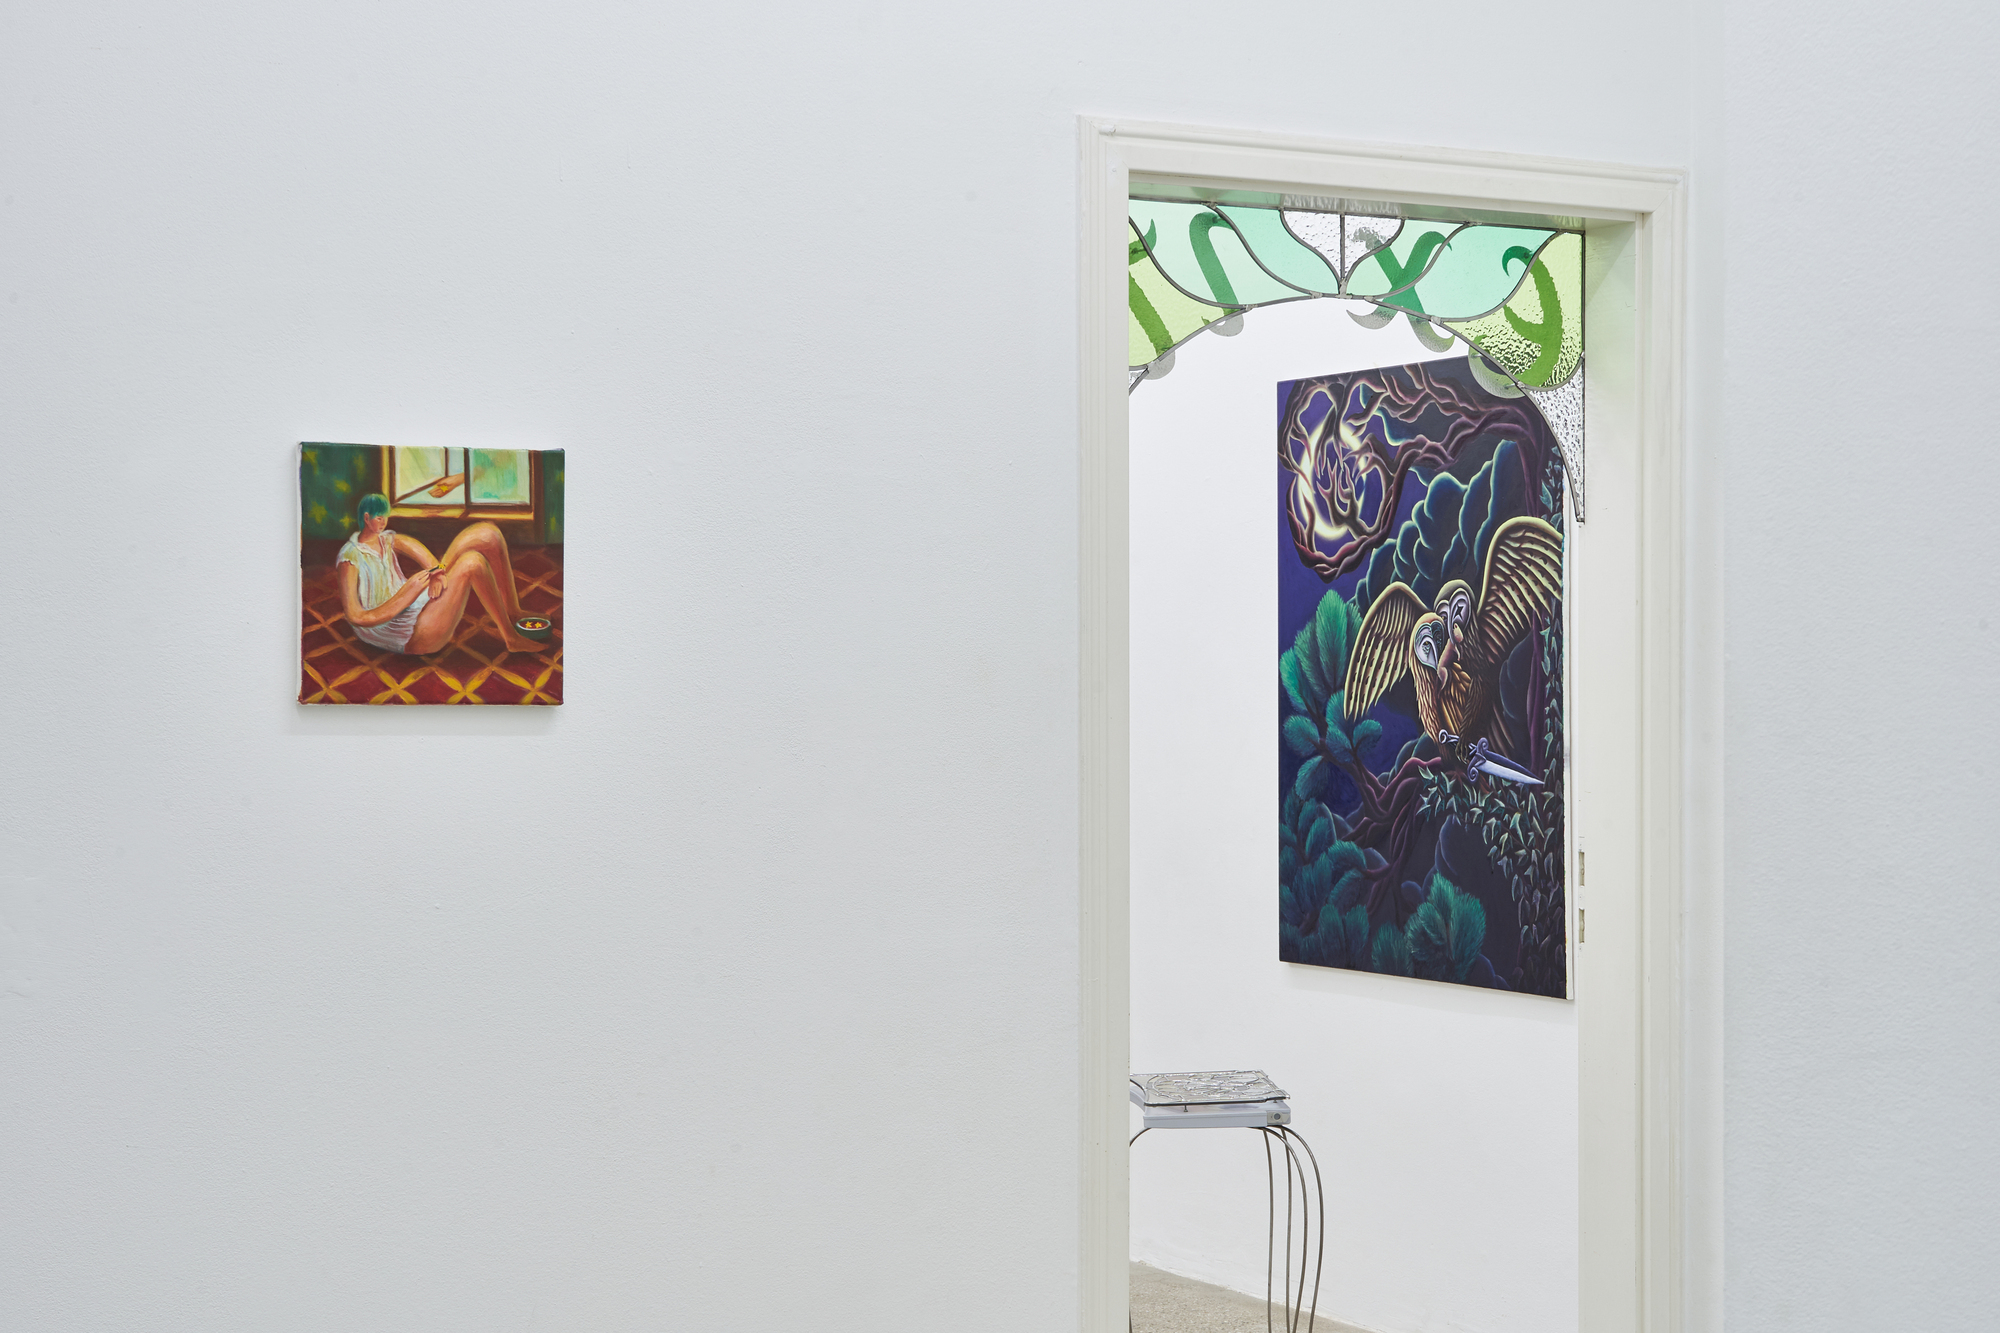 Exhibition view: works by Hannah Hyun Jeong and Jimmy Vuong